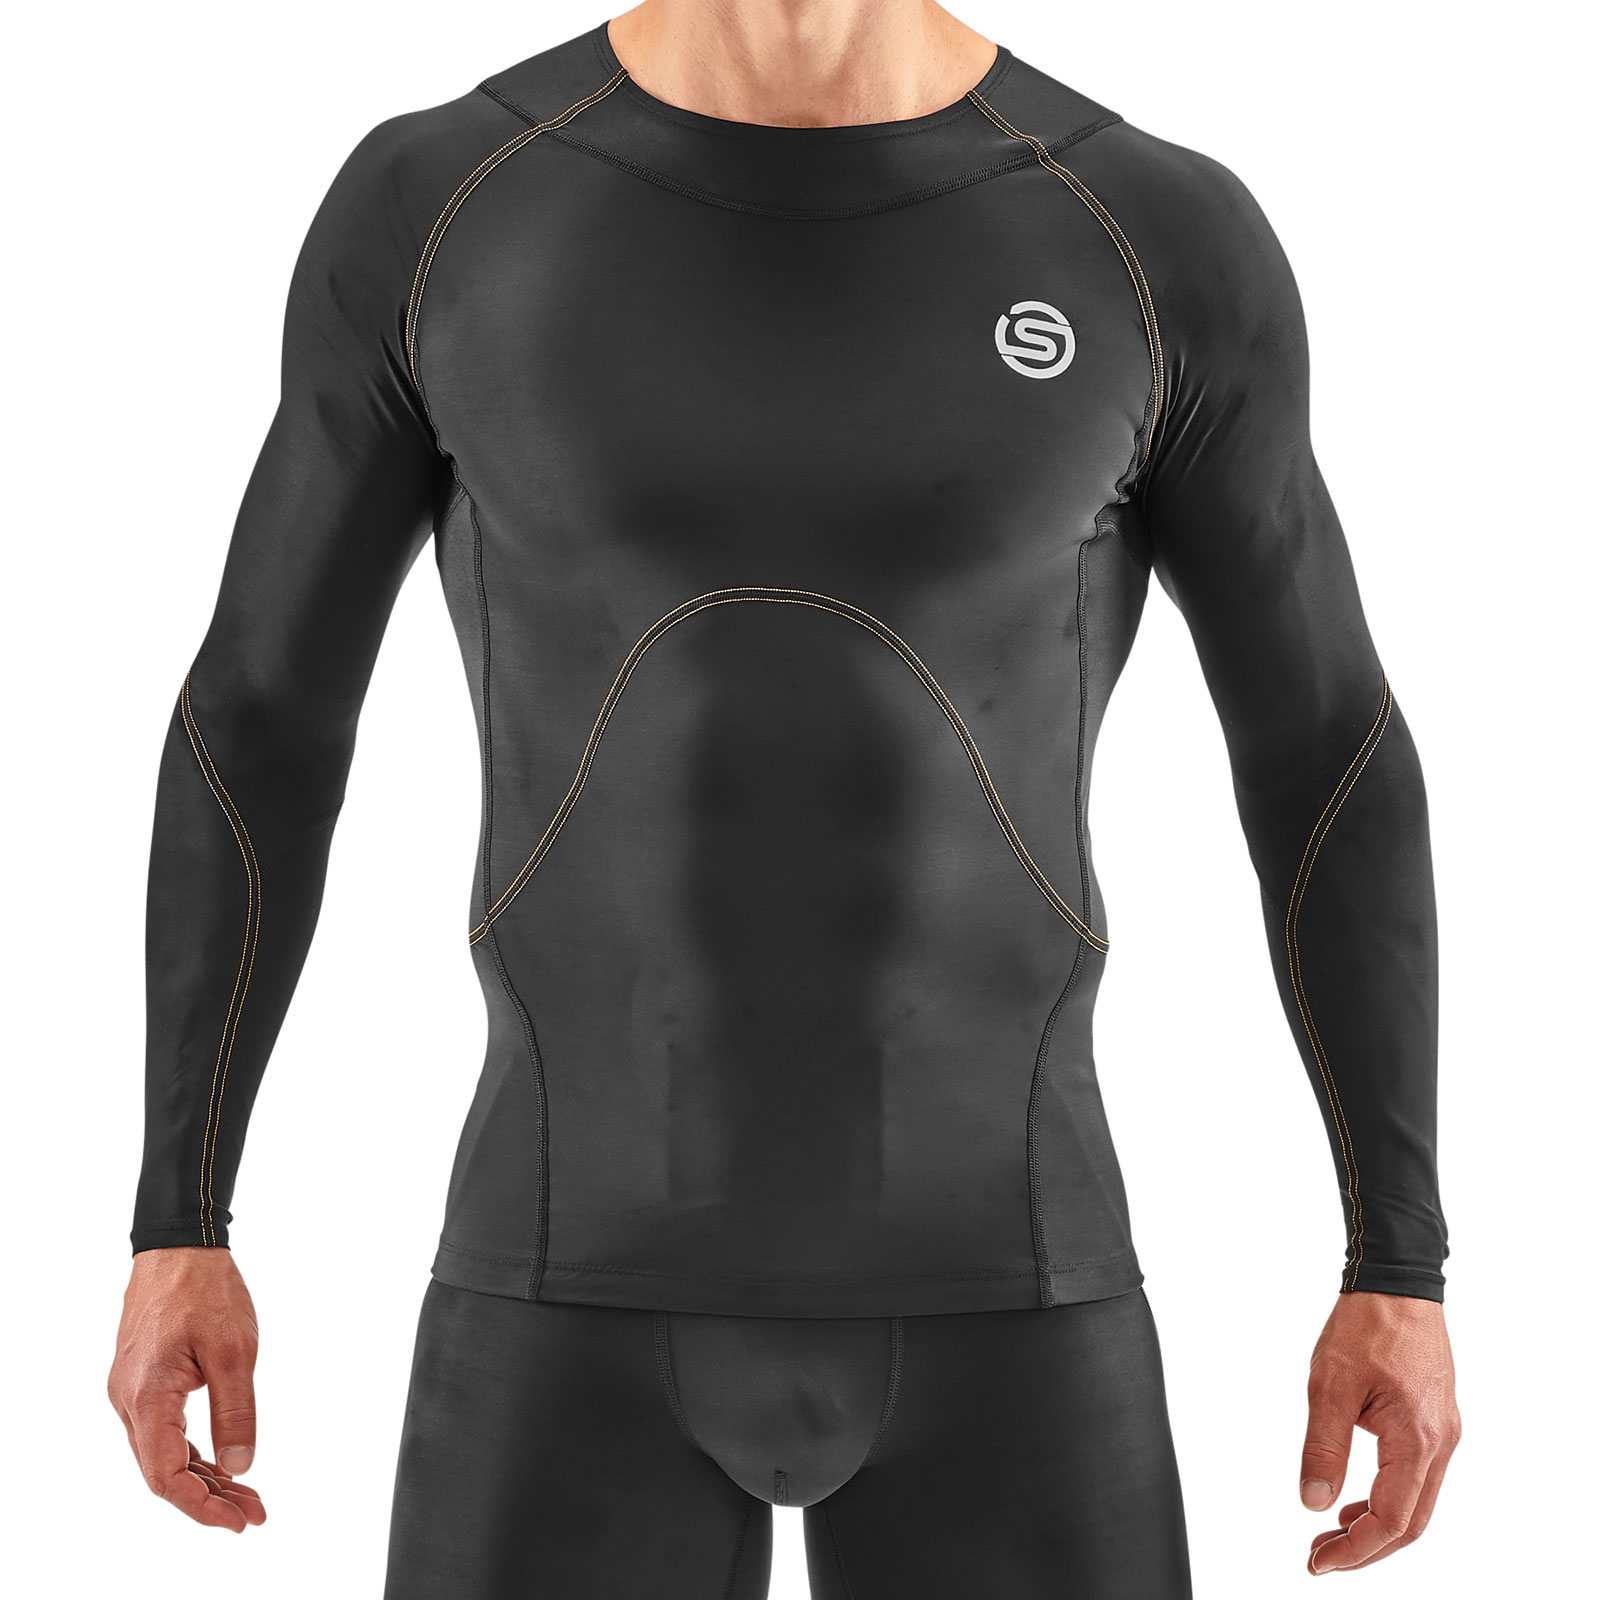 Men's SKINS Series 3 Travel and Recovery Compression Tights